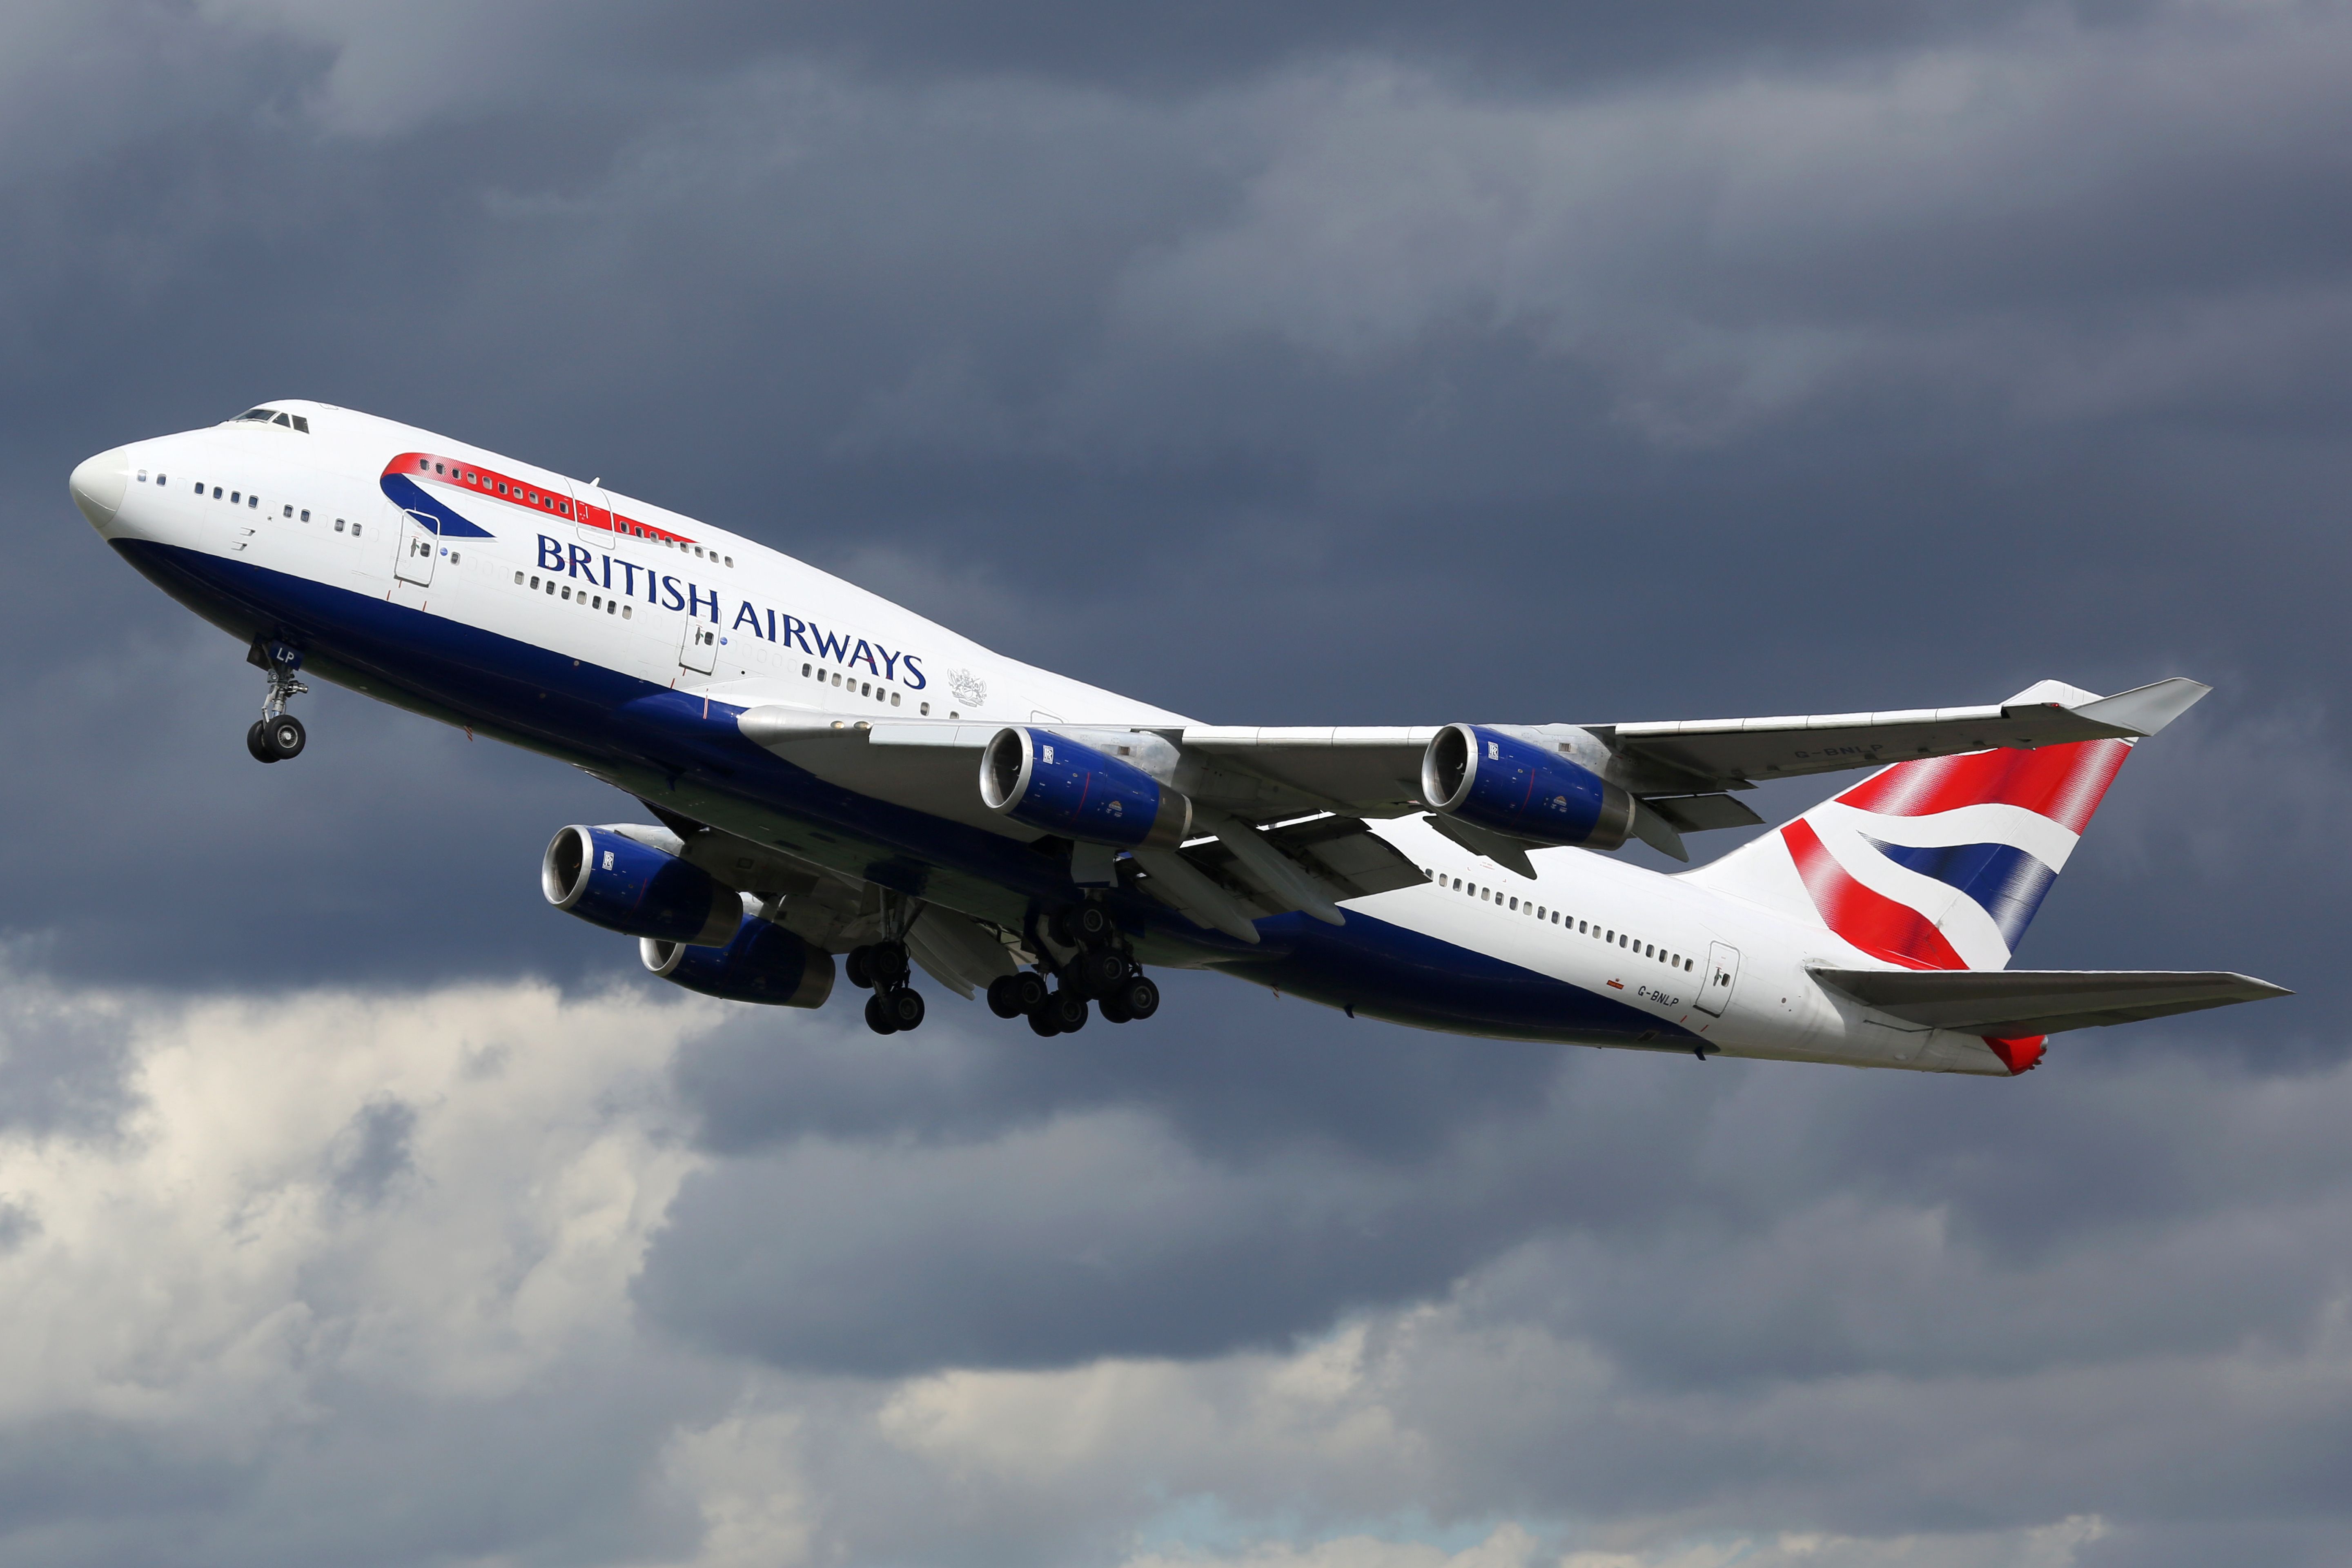 A British Airways Boeing 747 flying in the sky.